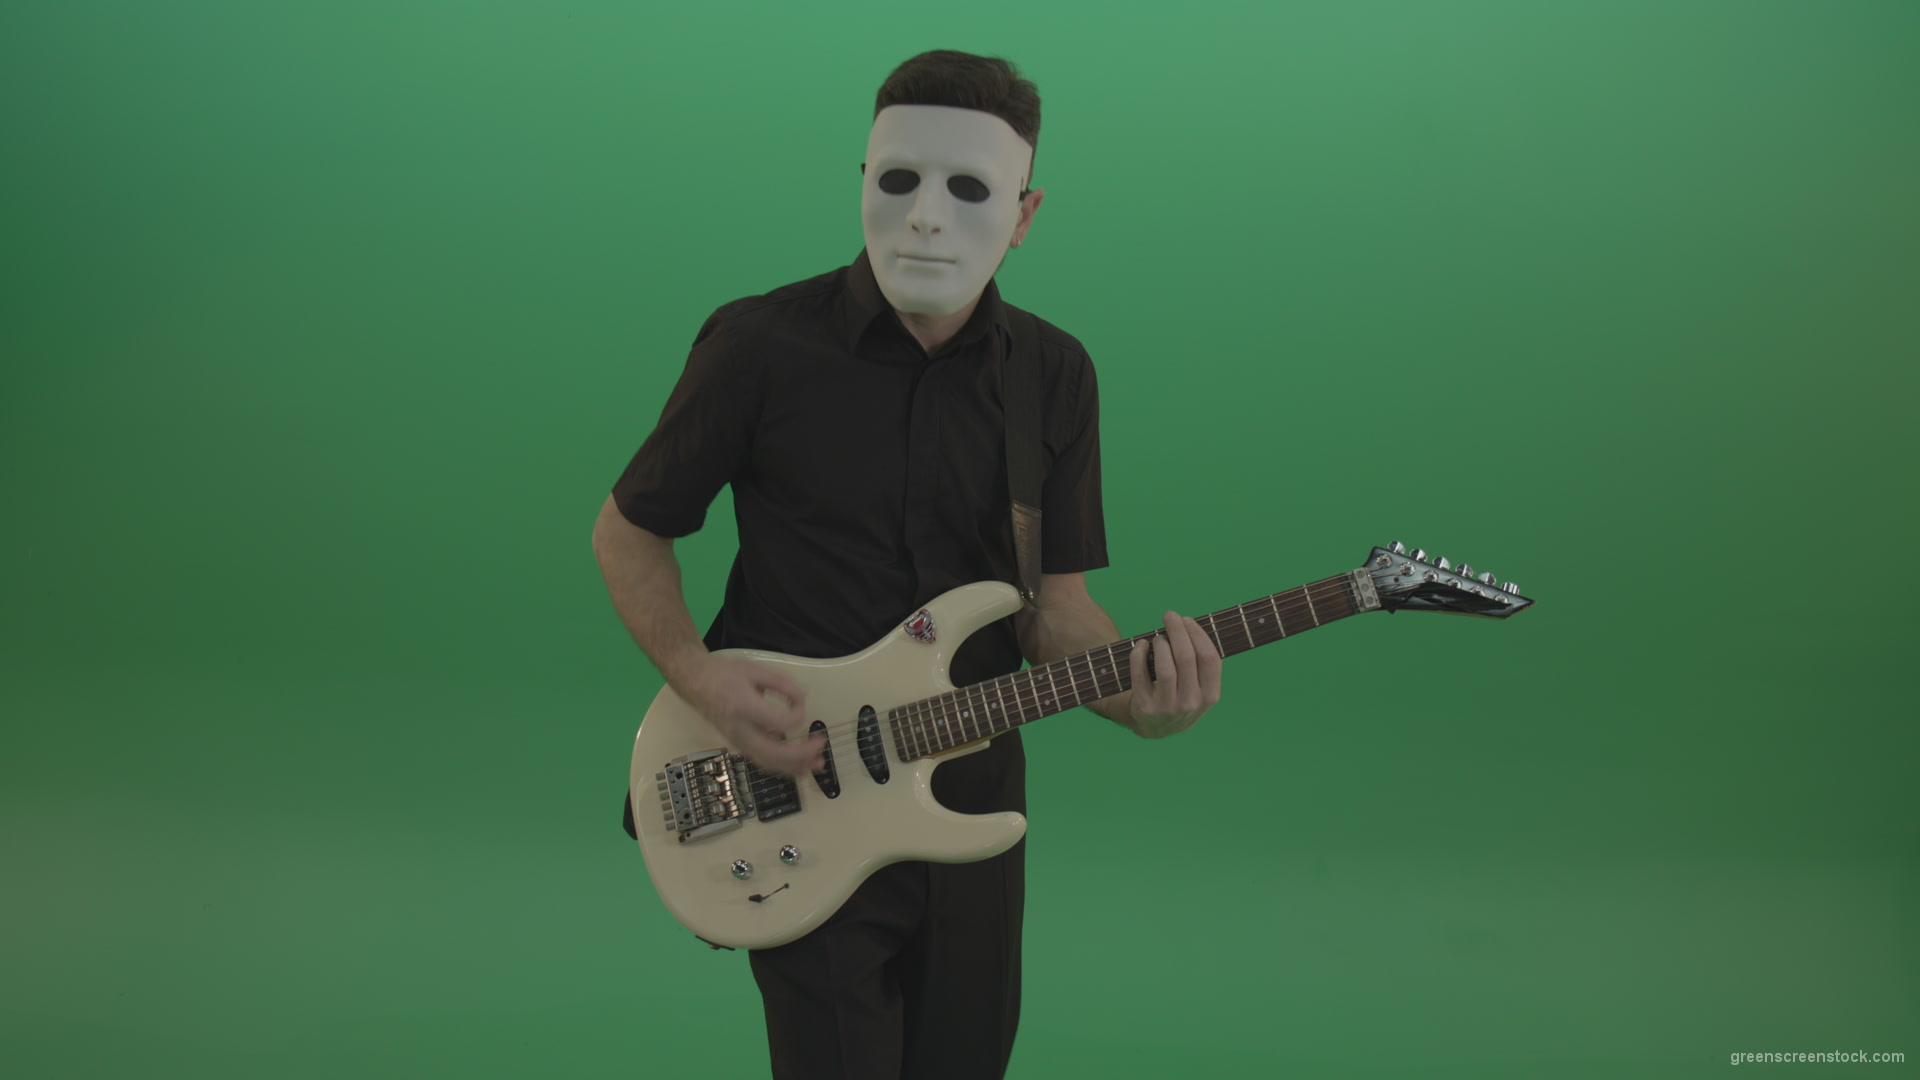 Rock-man-in-white-mask-and-black-wear-playing-guitar-isolated-on-green-screen-in-front-view_004 Green Screen Stock